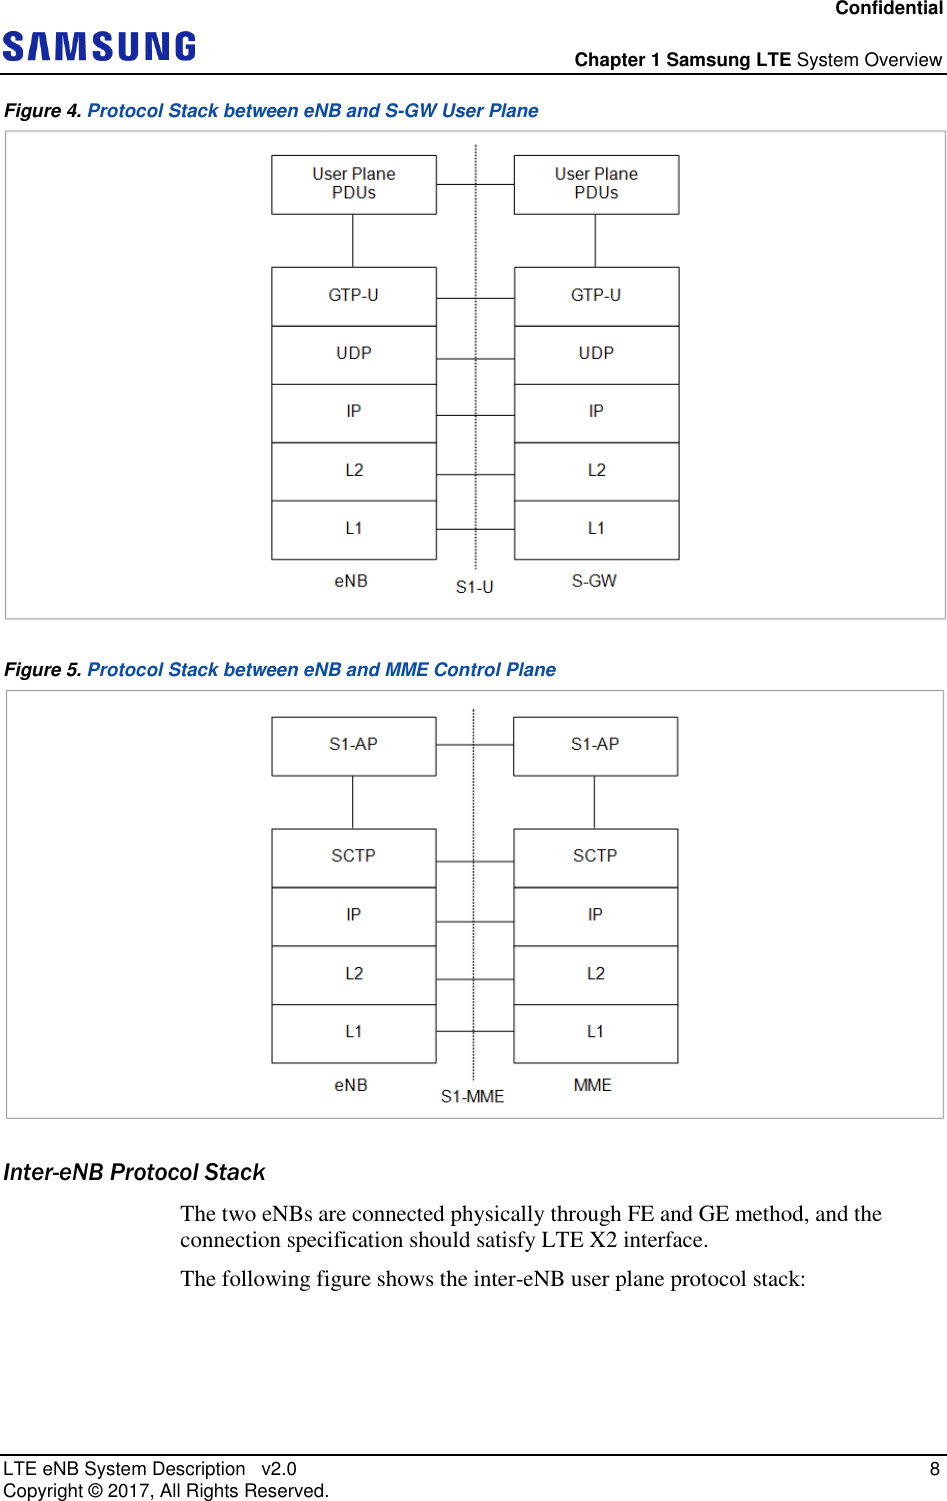 Confidential  Chapter 1 Samsung LTE System Overview LTE eNB System Description   v2.0    8 Copyright ©  2017, All Rights Reserved. Figure 4. Protocol Stack between eNB and S-GW User Plane  Figure 5. Protocol Stack between eNB and MME Control Plane  Inter-eNB Protocol Stack The two eNBs are connected physically through FE and GE method, and the connection specification should satisfy LTE X2 interface. The following figure shows the inter-eNB user plane protocol stack: 